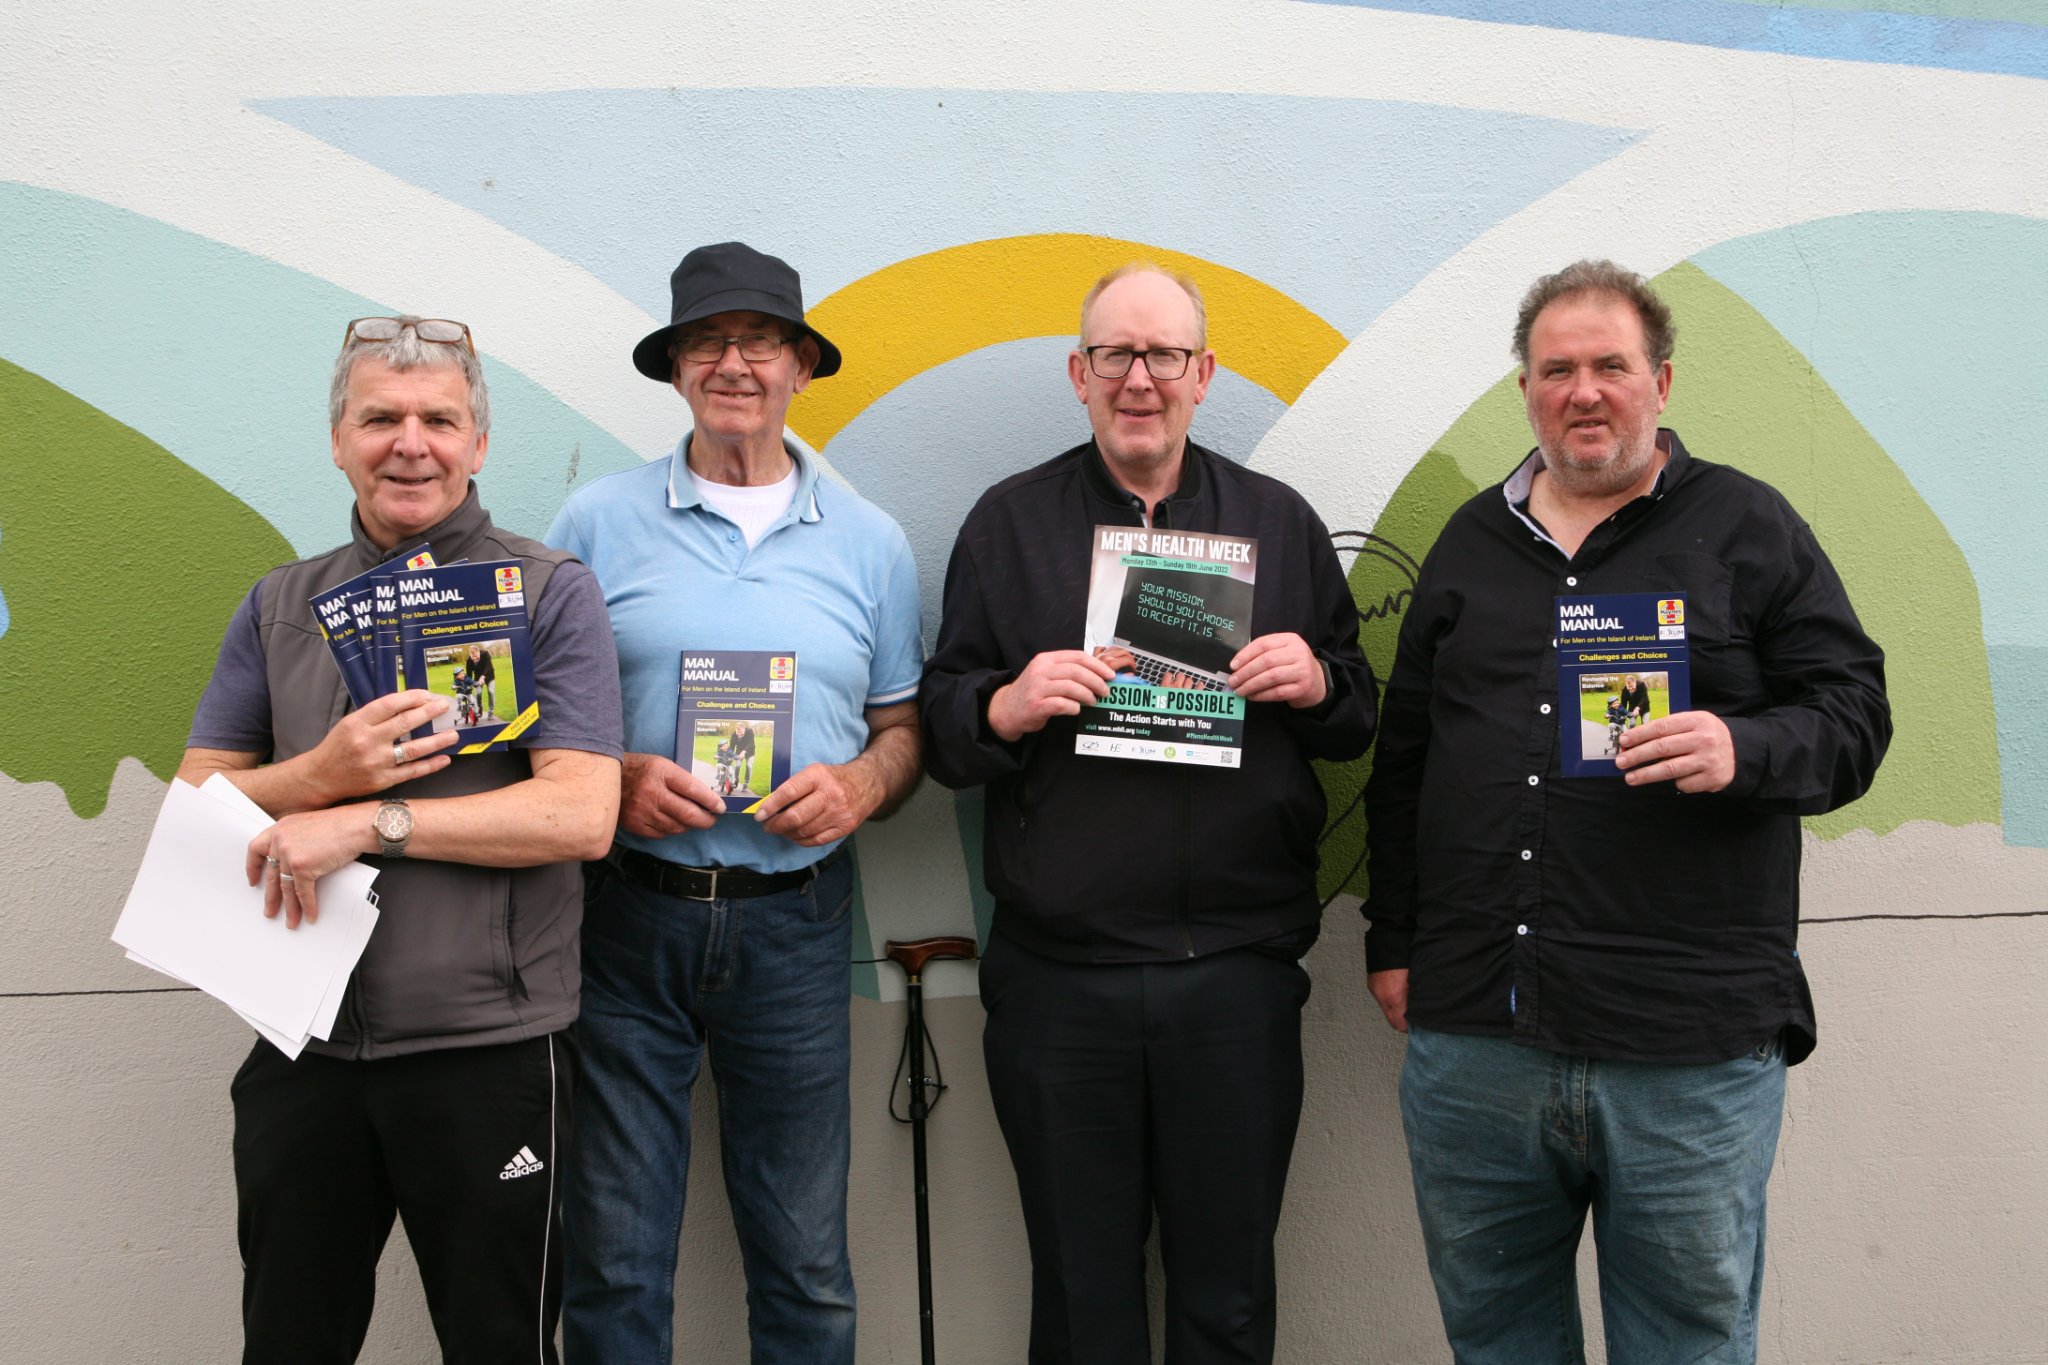 Lorcan Brennan visited Thomastown Men's Shed in Co Kilkenny during Men's Health Week for a talk about living well and signposting to services